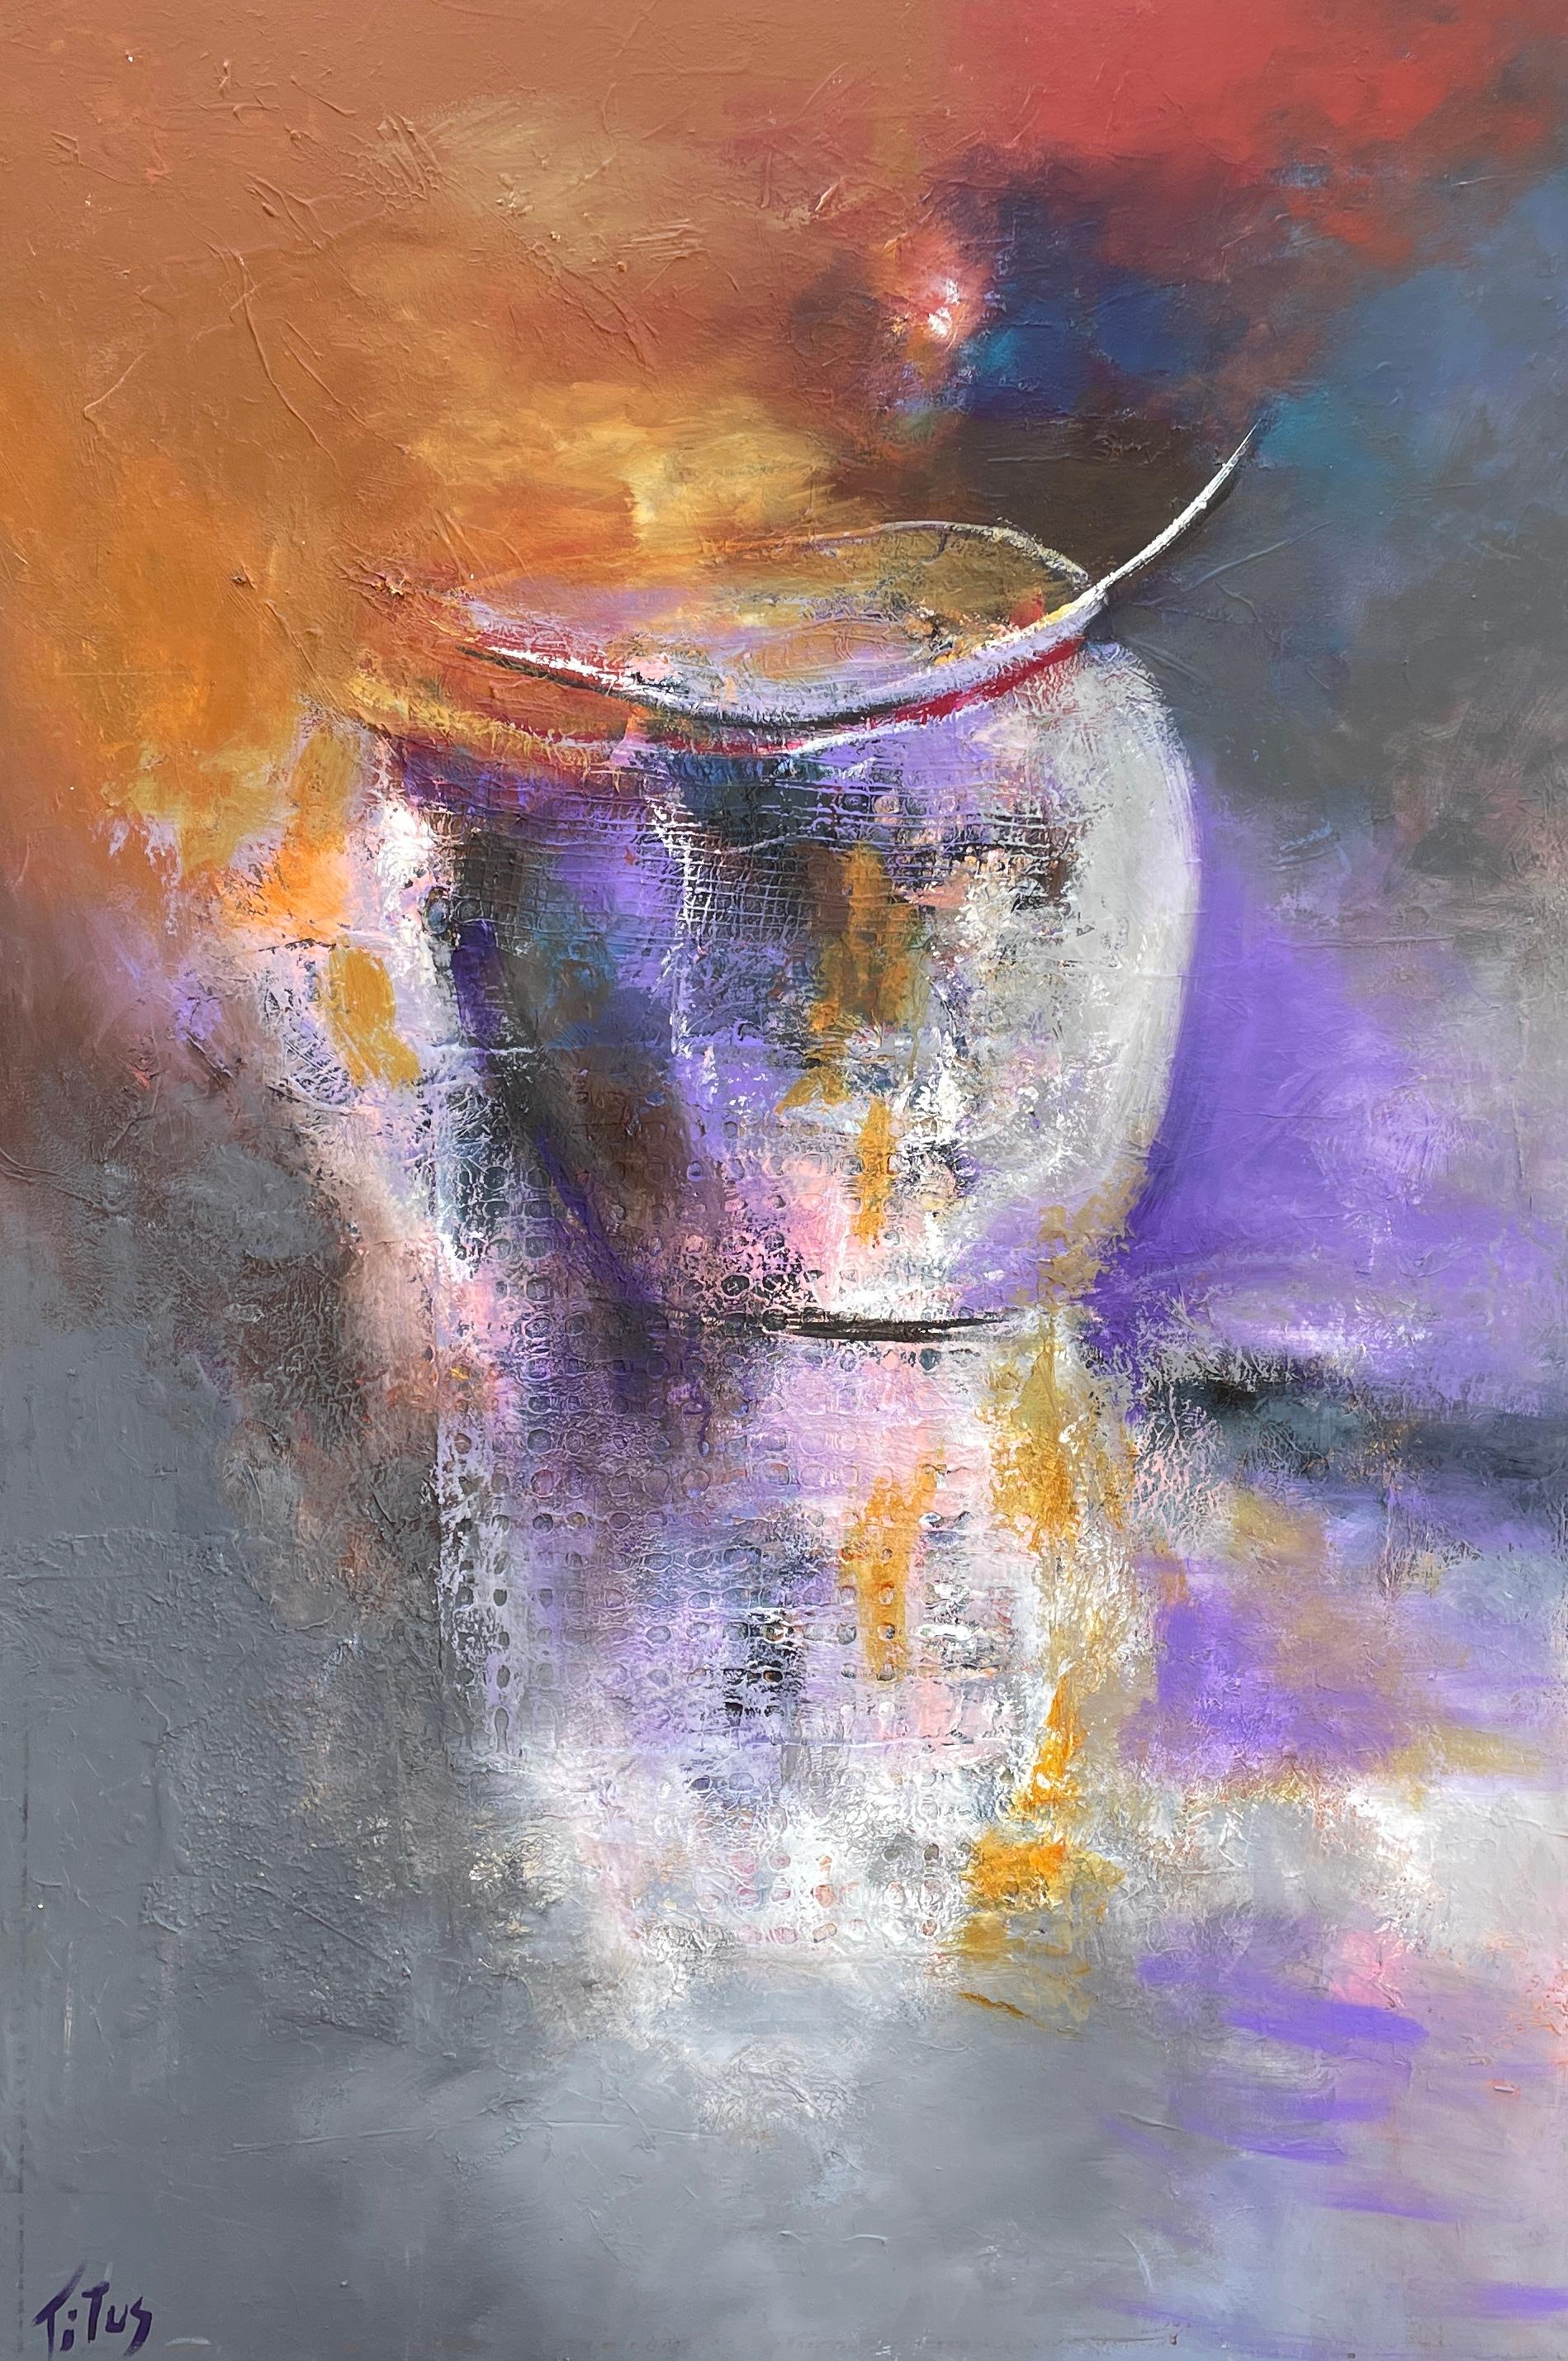 "Revive" by Mary Titus is a stirring piece that encapsulates the essence of abstract expressionism through its use of acrylic and mixed media on a 60" x 40" canvas. The artist employs a rich palette that transitions from a warm, sun-baked terracotta